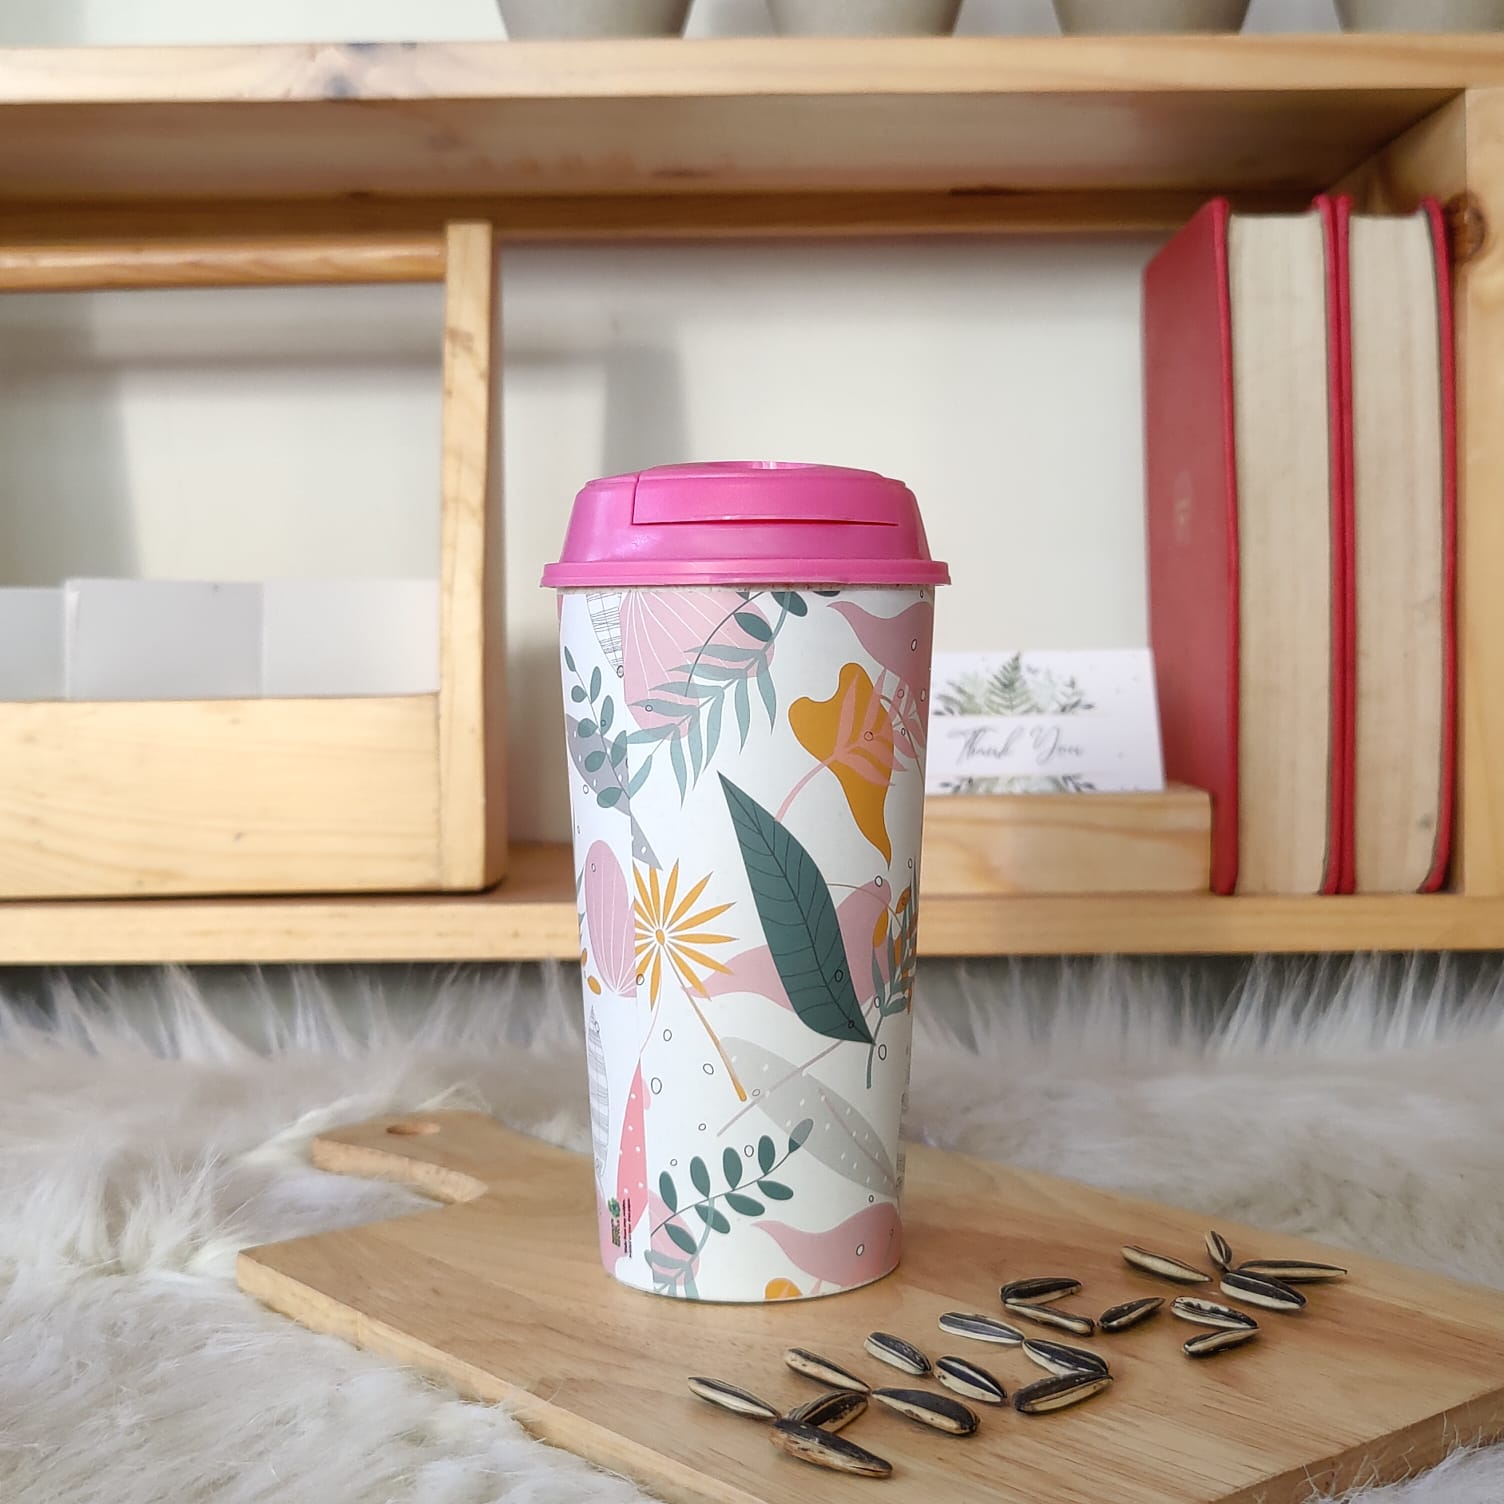 Designer Cups by Chirpy Cups with coffee & sipper lids -Floral Pink